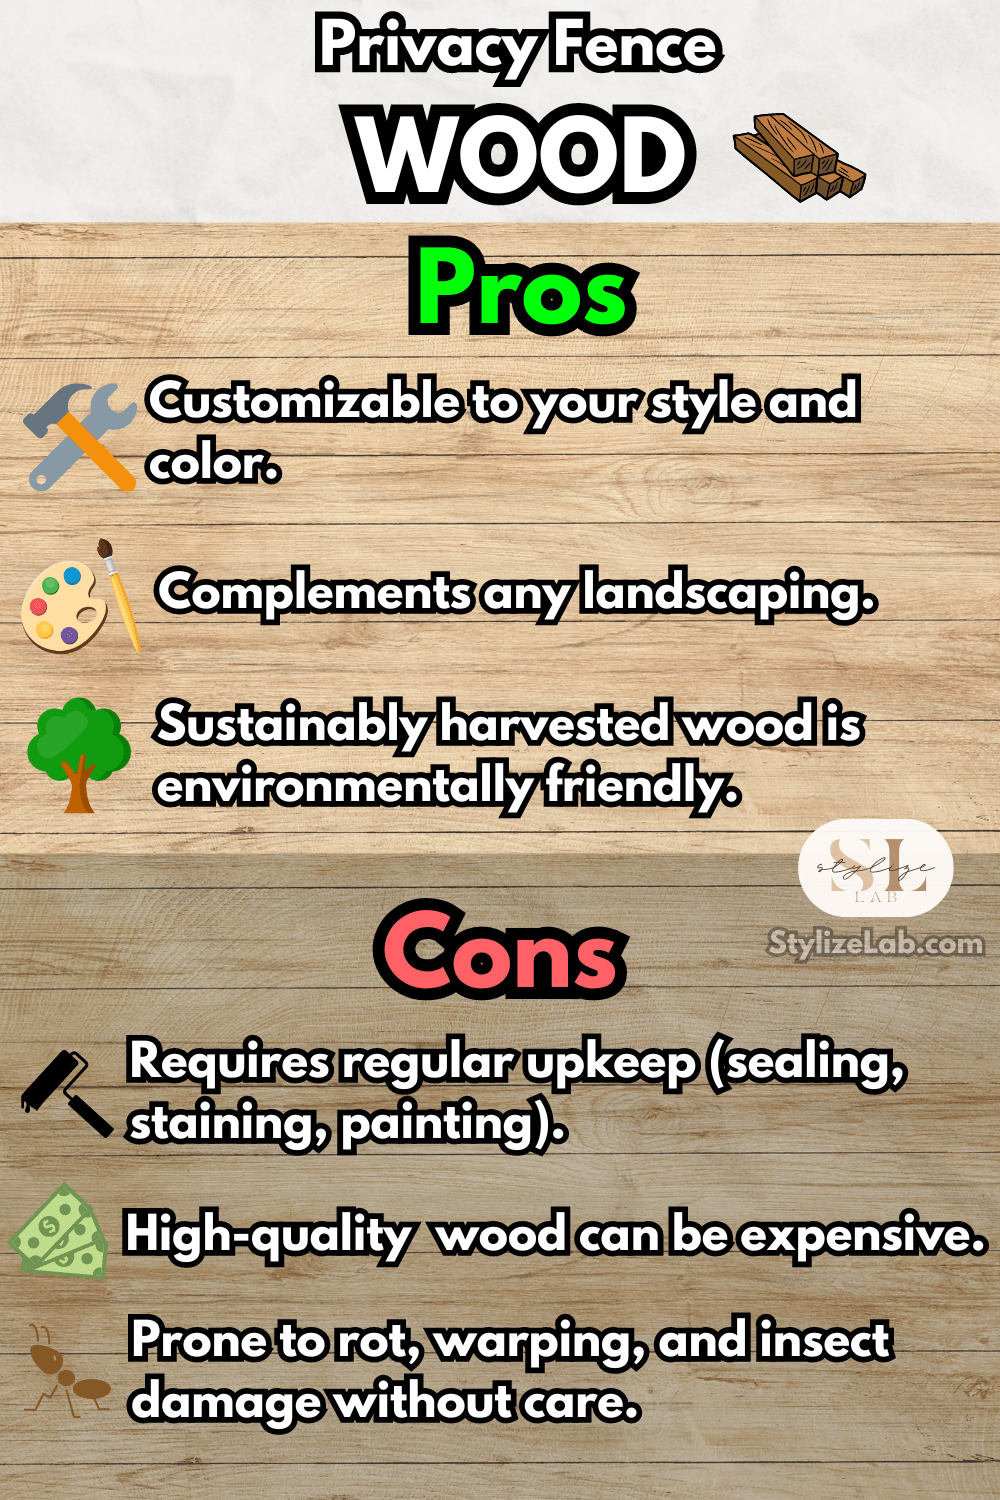 Privacy Fence wood material pros and cons